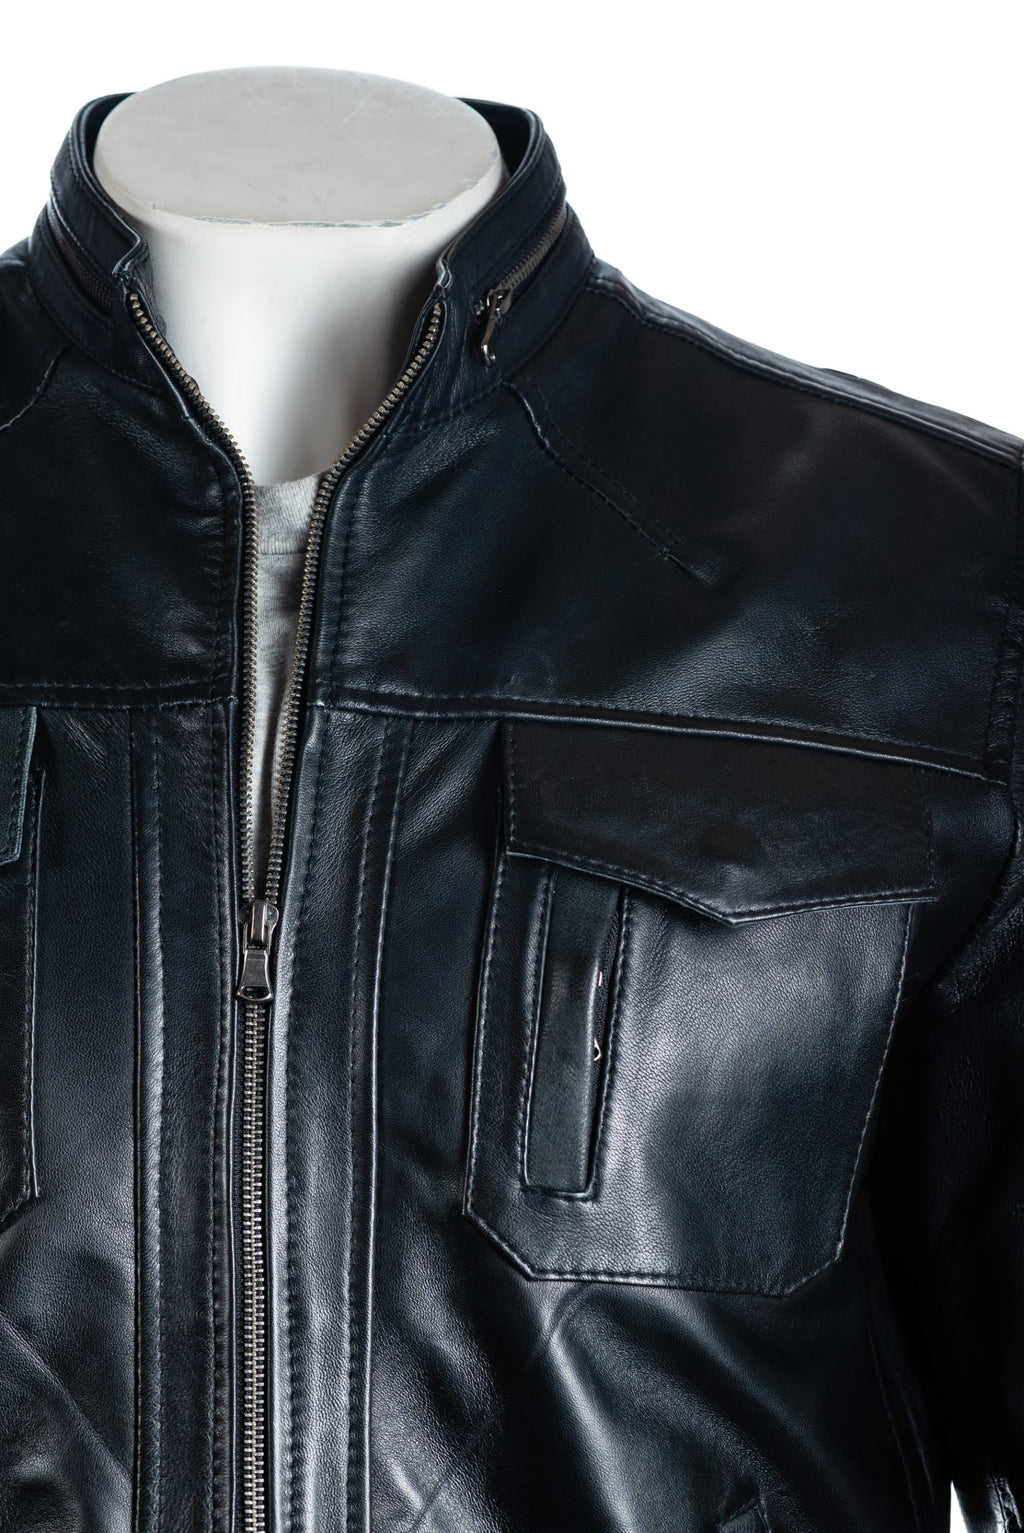 Men's Plus Size Classic Pocketed Leather Jacket: Renato